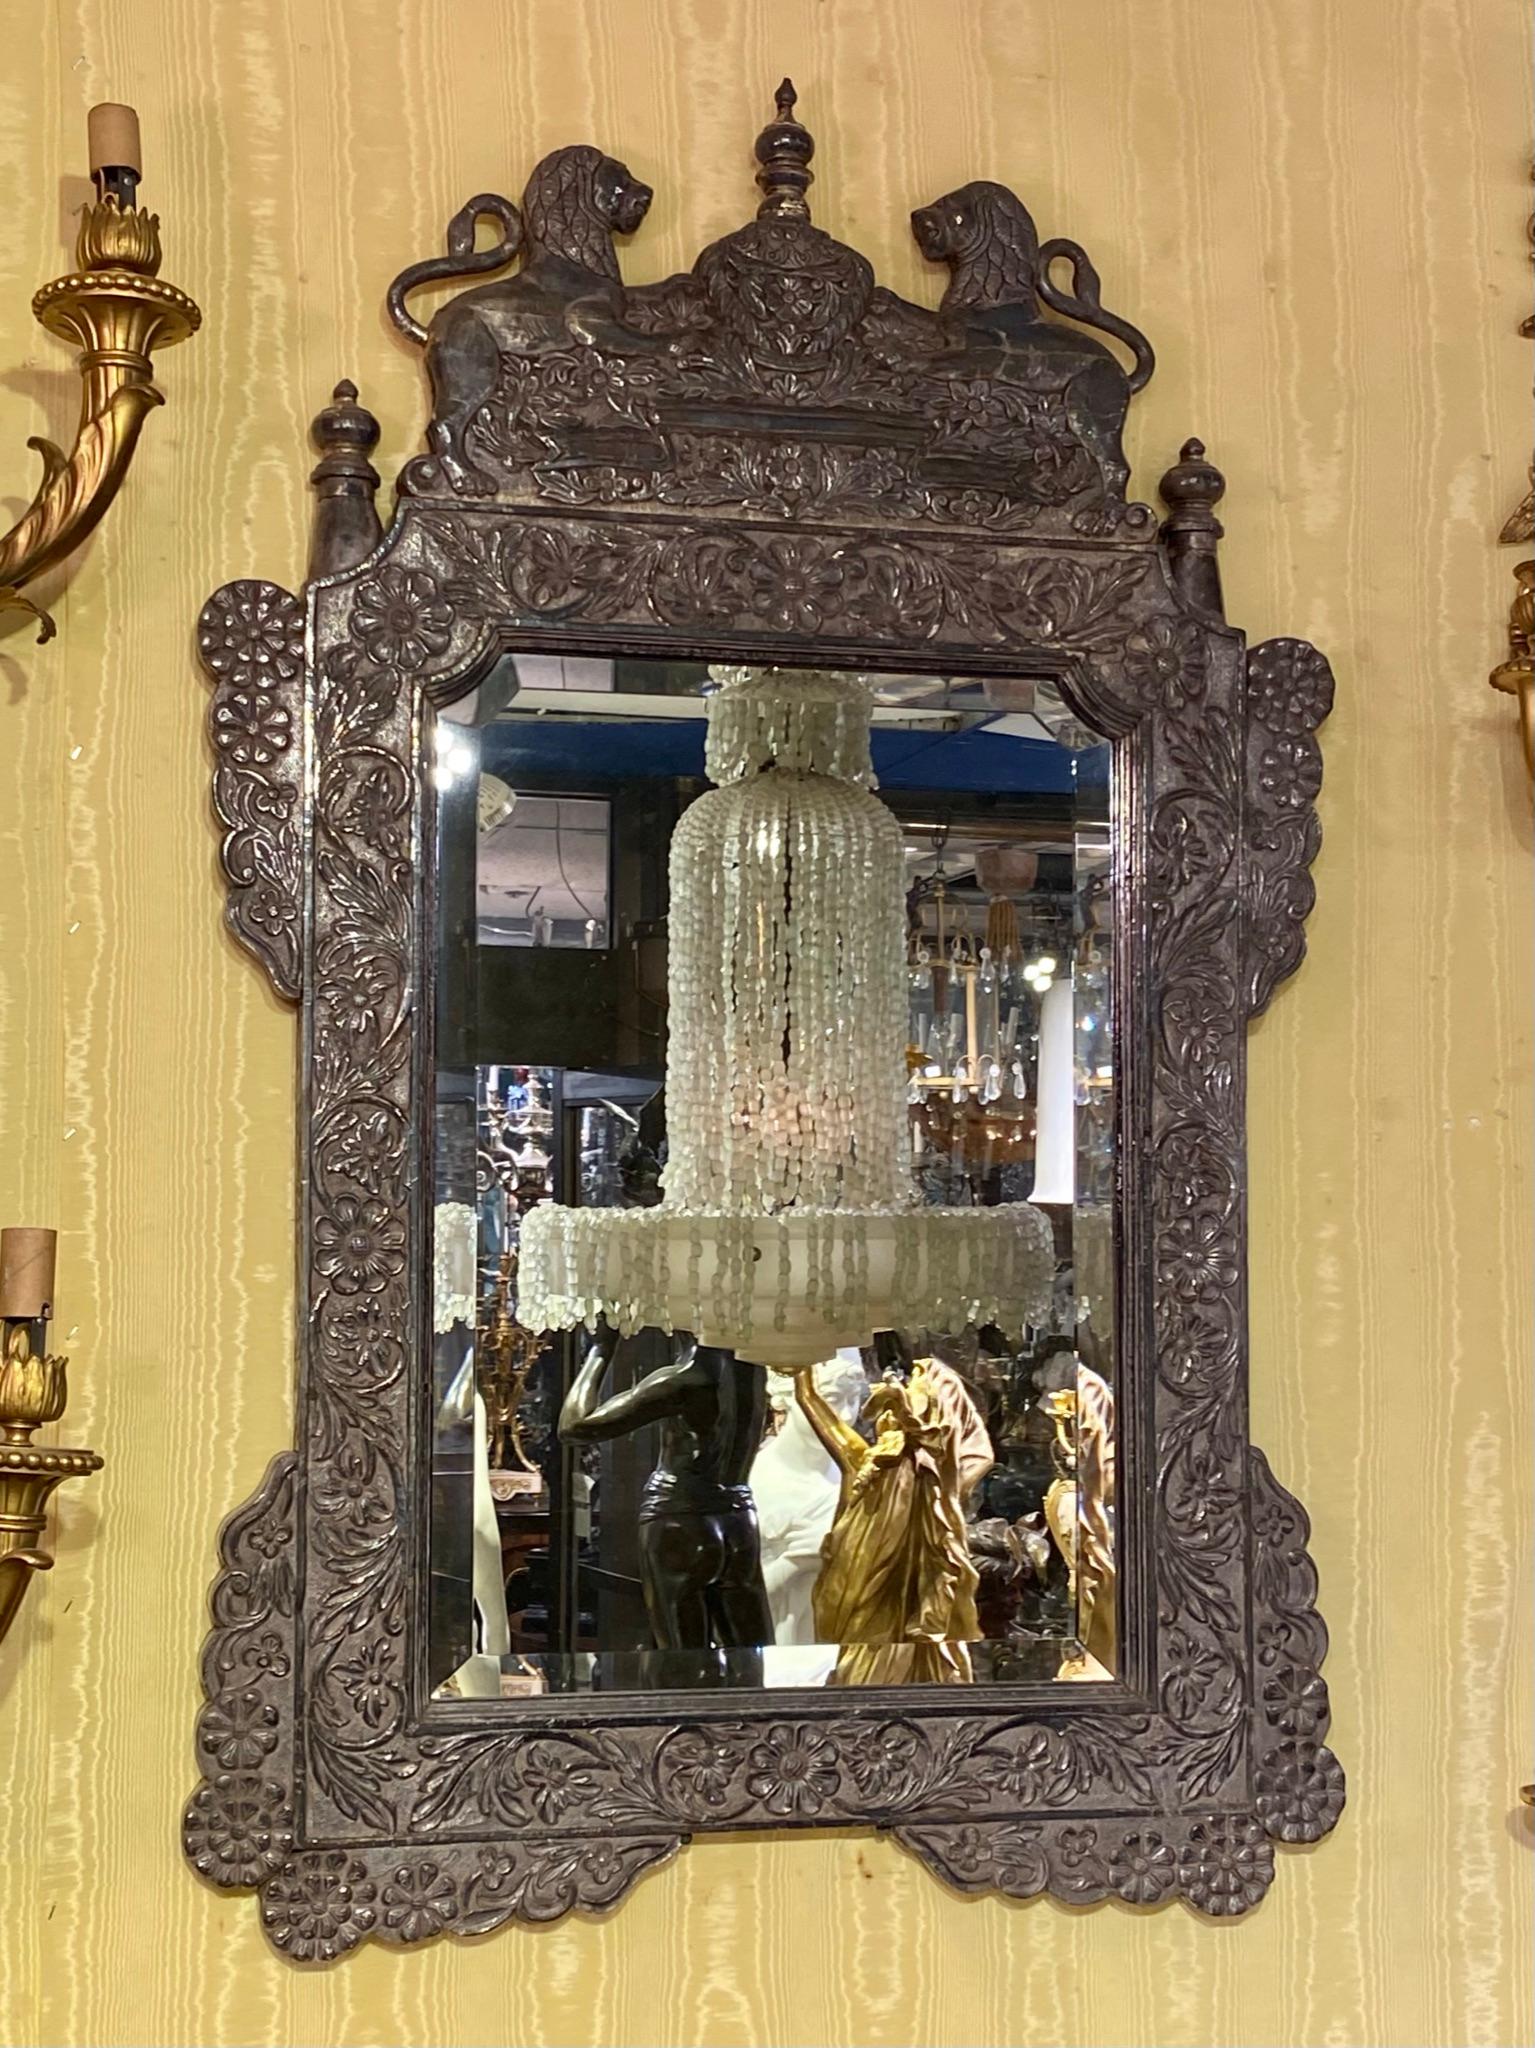 Very fine quality 19 century ornate Indian silver clad mirror.